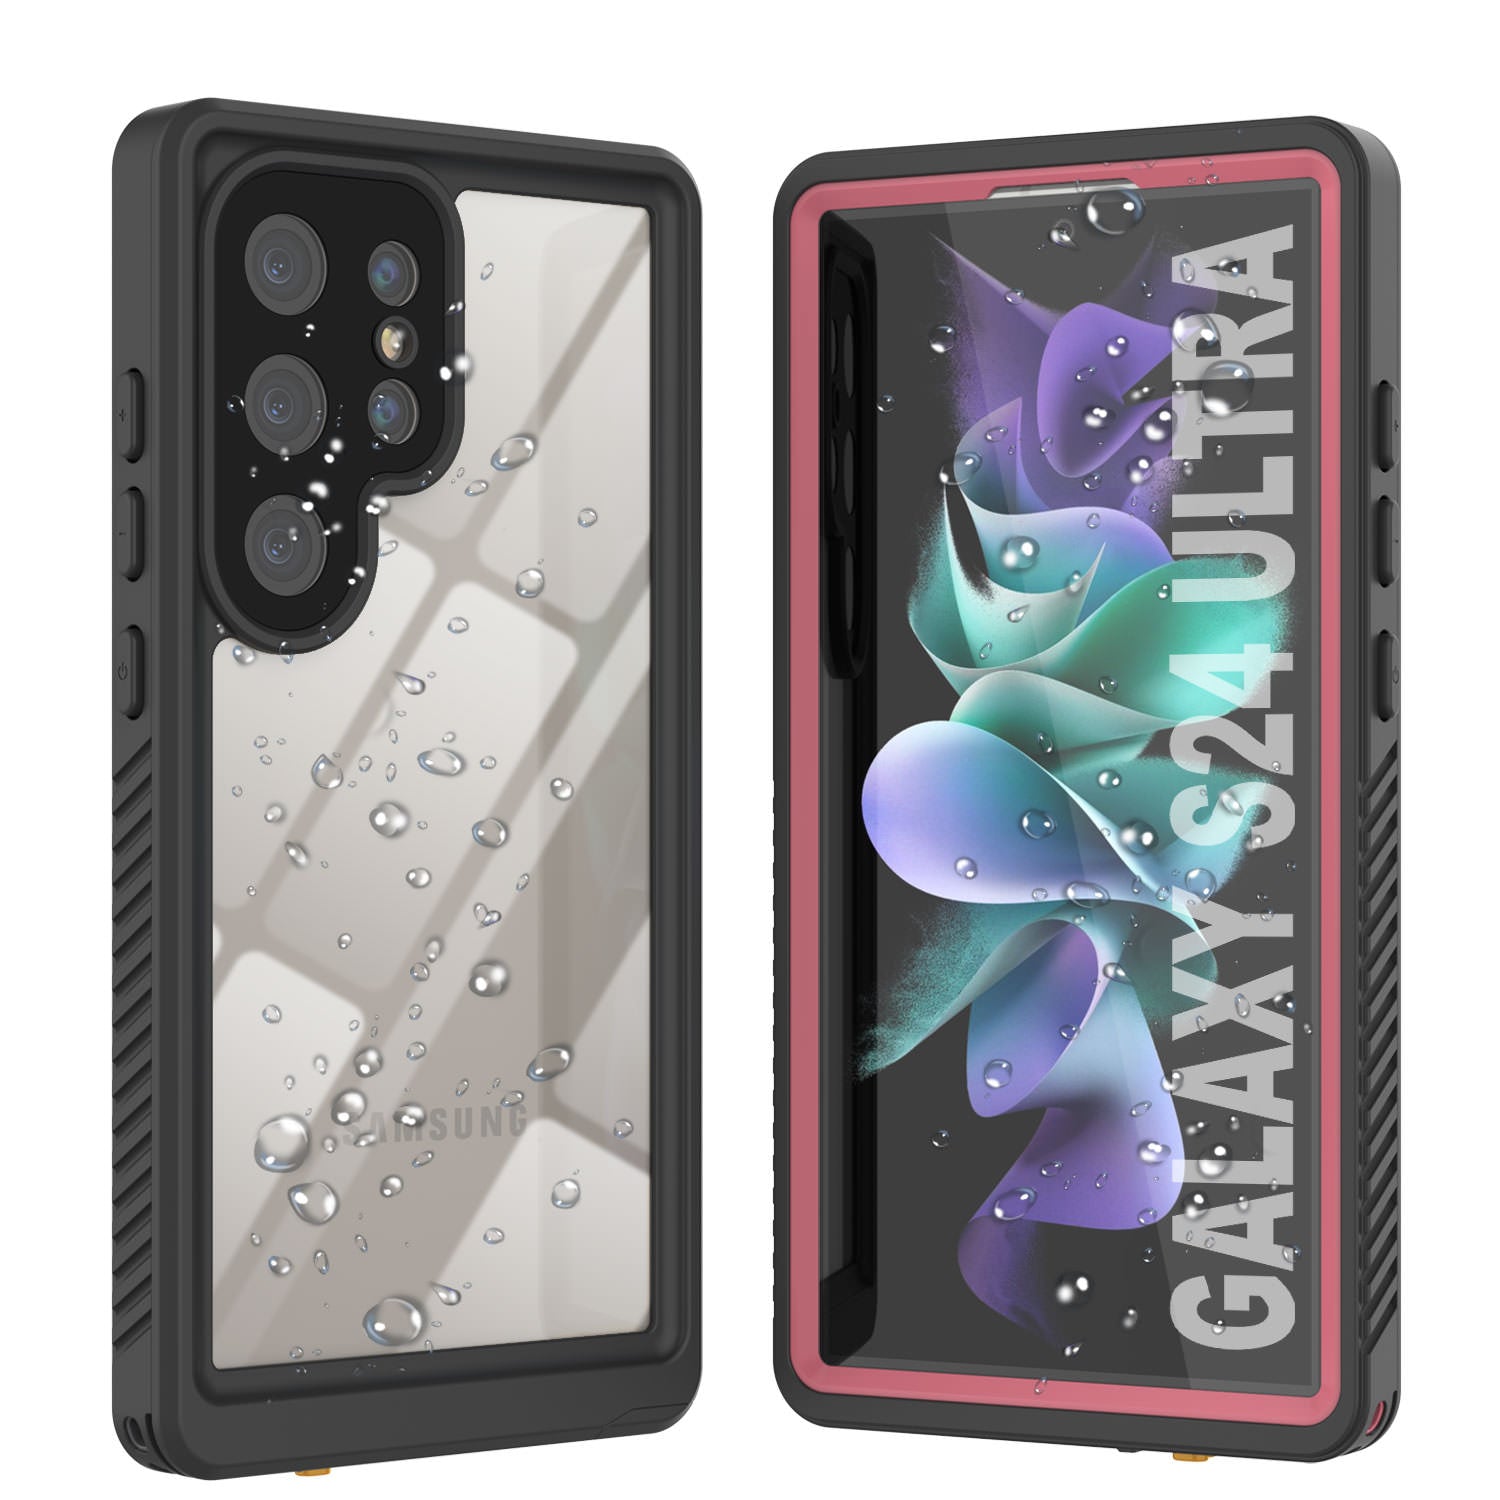 https://www.punkcase.com/cdn/shop/files/galaxy-S24-ultra-waterproof-case-extreme-series-ultra-slim-fit-innovative-design-ip68-certified-advanced-sealing-scratch-resistant-shockproof-dirtproof-snowproof-armor-cover-for-galax_374d5adc-17e2-4da8-a86c-3d6f32cbcaa9.jpg?v=1704836514